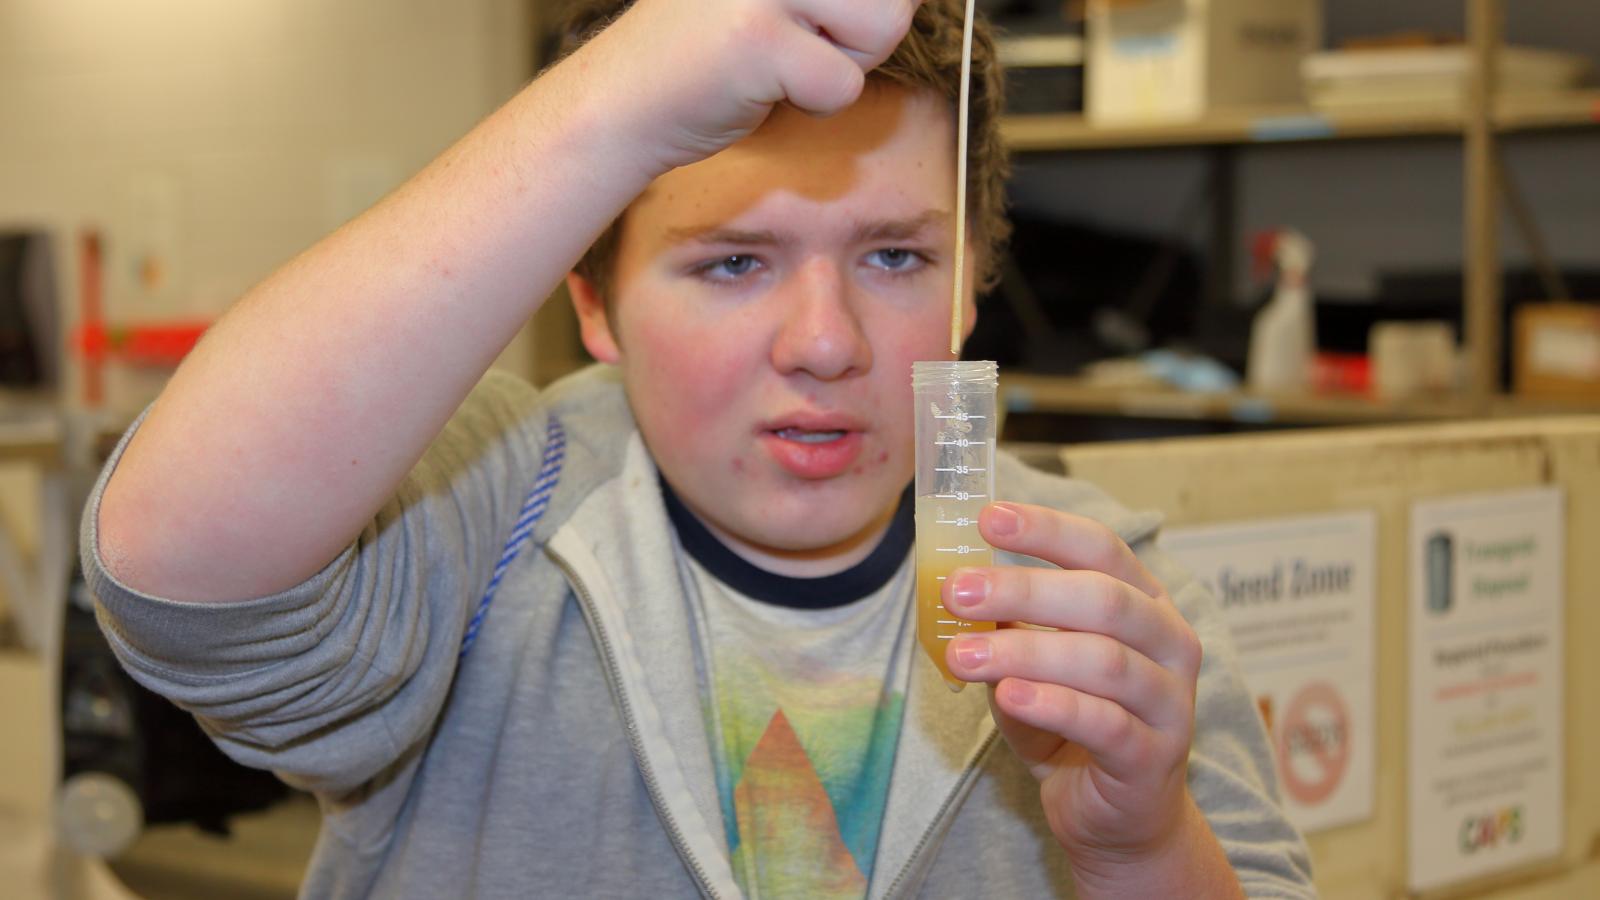 A middle school student extracts DNA from applesauce during a field trip